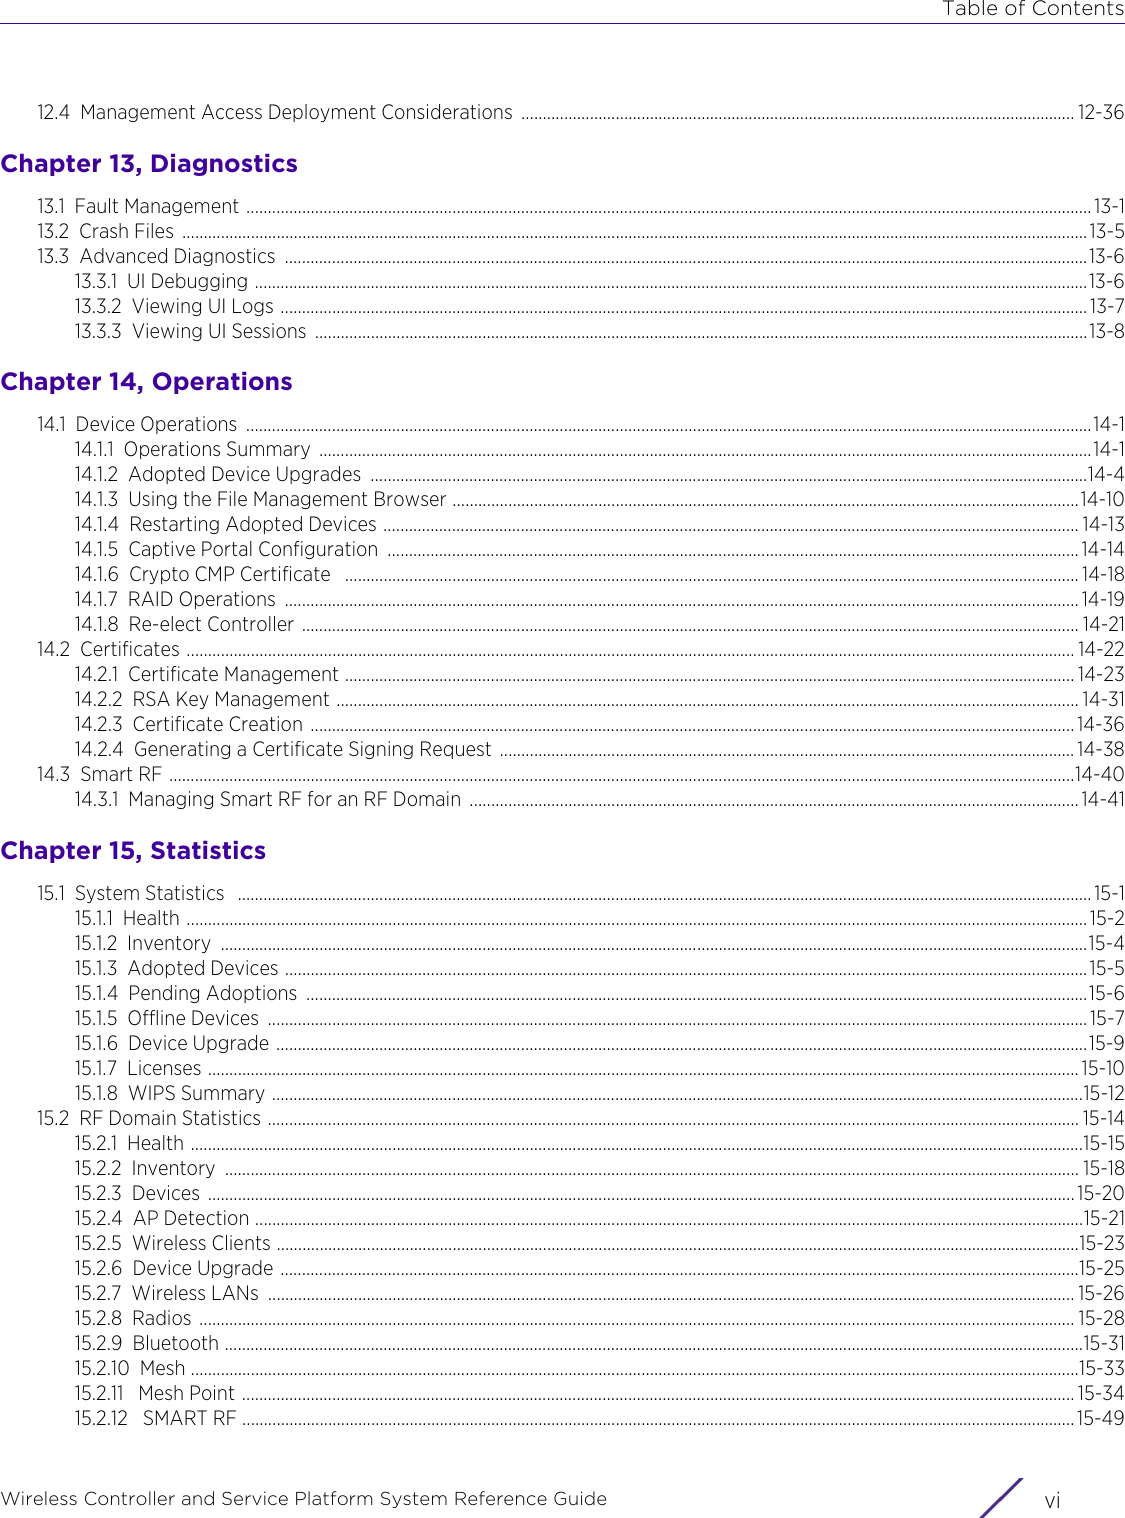 Table of ContentsWireless Controller and Service Platform System Reference Guide  vi12.4 Management Access Deployment Considerations  ................................................................................................................................. 12-36Chapter 13, Diagnostics13.1 Fault Management ..................................................................................................................................................................................................... 13-113.2 Crash Files  ................................................................................................................................................................................................................... 13-513.3 Advanced Diagnostics  ...........................................................................................................................................................................................13-613.3.1 UI Debugging ..................................................................................................................................................................................................13-613.3.2 Viewing UI Logs ............................................................................................................................................................................................ 13-713.3.3 Viewing UI Sessions  ....................................................................................................................................................................................13-8Chapter 14, Operations14.1 Device Operations  .....................................................................................................................................................................................................14-114.1.1 Operations Summary  ....................................................................................................................................................................................14-114.1.2 Adopted Device Upgrades  .......................................................................................................................................................................14-414.1.3 Using the File Management Browser ..................................................................................................................................................14-1014.1.4 Restarting Adopted Devices .................................................................................................................................................................. 14-1314.1.5 Captive Portal Configuration  ................................................................................................................................................................. 14-1414.1.6 Crypto CMP Certificate   ........................................................................................................................................................................... 14-1814.1.7 RAID Operations  ......................................................................................................................................................................................... 14-1914.1.8 Re-elect Controller  ..................................................................................................................................................................................... 14-2114.2 Certificates ............................................................................................................................................................................................................... 14-2214.2.1 Certificate Management .......................................................................................................................................................................... 14-2314.2.2 RSA Key Management ............................................................................................................................................................................. 14-3114.2.3 Certificate Creation .................................................................................................................................................................................. 14-3614.2.4 Generating a Certificate Signing Request  ...................................................................................................................................... 14-3814.3 Smart RF ...................................................................................................................................................................................................................14-4014.3.1 Managing Smart RF for an RF Domain  .............................................................................................................................................. 14-41Chapter 15, Statistics15.1 System Statistics   ....................................................................................................................................................................................................... 15-115.1.1 Health ..................................................................................................................................................................................................................15-215.1.2 Inventory ..........................................................................................................................................................................................................15-415.1.3 Adopted Devices ...........................................................................................................................................................................................15-515.1.4 Pending Adoptions  ......................................................................................................................................................................................15-615.1.5 Offline Devices  ............................................................................................................................................................................................... 15-715.1.6 Device Upgrade .............................................................................................................................................................................................15-915.1.7 Licenses ........................................................................................................................................................................................................... 15-1015.1.8 WIPS Summary .............................................................................................................................................................................................15-1215.2 RF Domain Statistics ............................................................................................................................................................................................. 15-1415.2.1 Health ................................................................................................................................................................................................................15-1515.2.2 Inventory ....................................................................................................................................................................................................... 15-1815.2.3 Devices .......................................................................................................................................................................................................... 15-2015.2.4 AP Detection .................................................................................................................................................................................................15-2115.2.5 Wireless Clients ...........................................................................................................................................................................................15-2315.2.6 Device Upgrade ..........................................................................................................................................................................................15-2515.2.7 Wireless LANs  ............................................................................................................................................................................................ 15-2615.2.8 Radios ............................................................................................................................................................................................................ 15-2815.2.9 Bluetooth ........................................................................................................................................................................................................15-3115.2.10 Mesh ...............................................................................................................................................................................................................15-3315.2.11  Mesh Point .................................................................................................................................................................................................. 15-3415.2.12  SMART RF .................................................................................................................................................................................................. 15-49